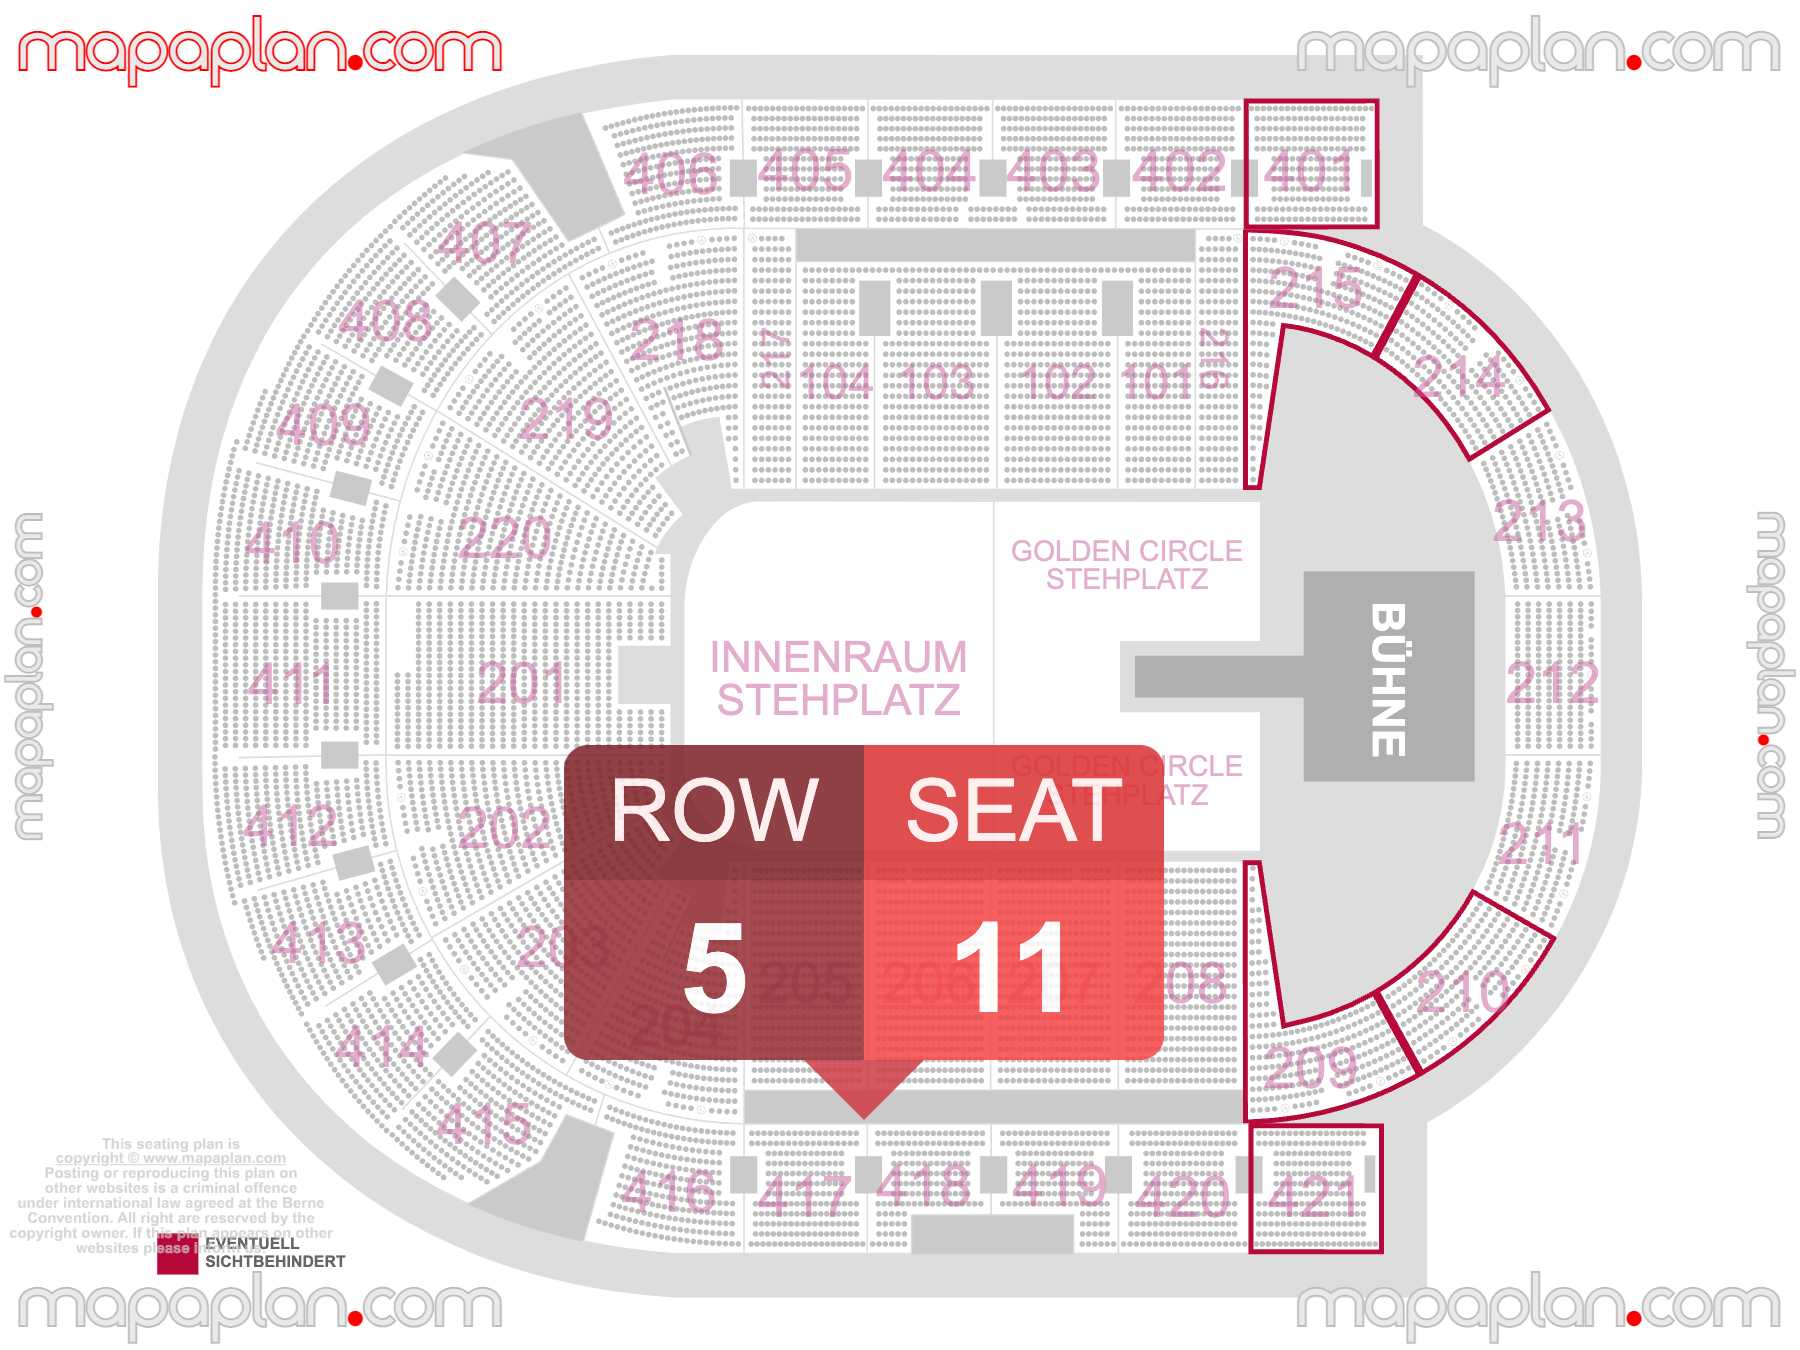 Berlin Uber Arena seating plan Concert with floor general admission standing room only Sitzplan mit Sitzplatz und Reihen Nummerierung seating plan with exact section numbers showing best rows and seats selection 3d layout - Best interactive seat finder tool with precise detailed location data